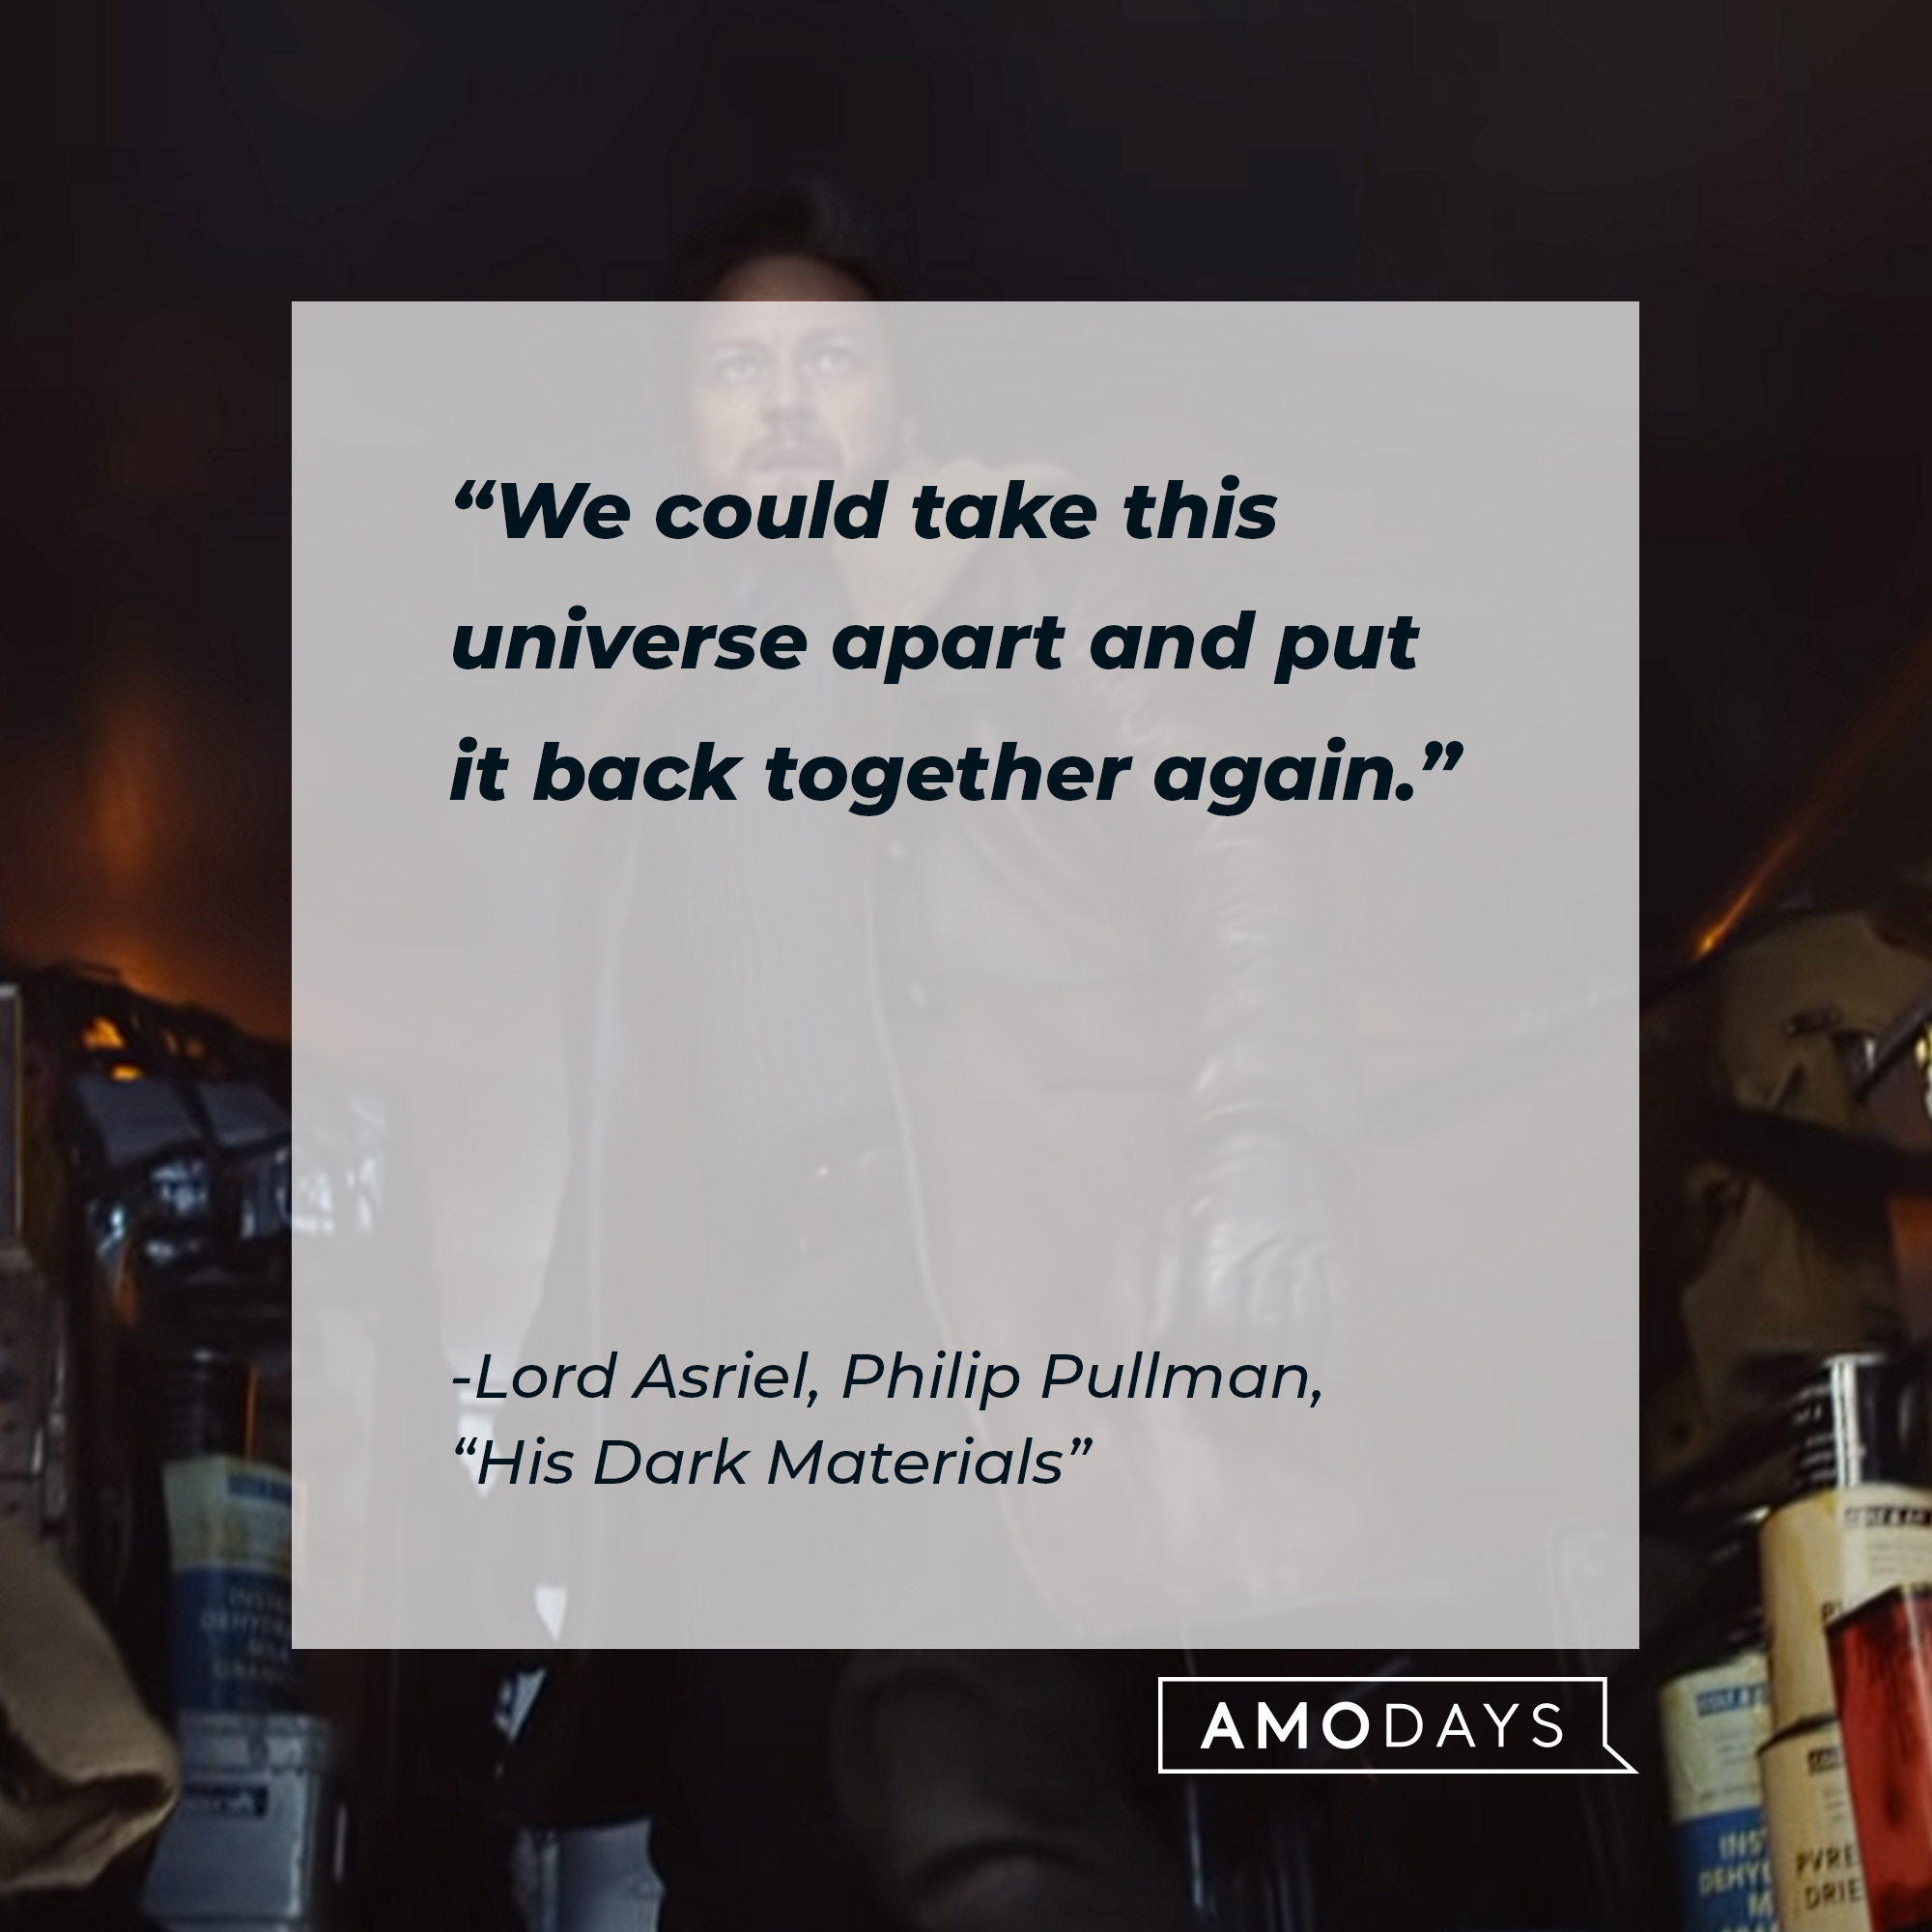 An image of the character Lord Asriel from "His Dark Materials" with his quote: “We could take this universe apart and put it back together again." | Source: youtube.com/HBO